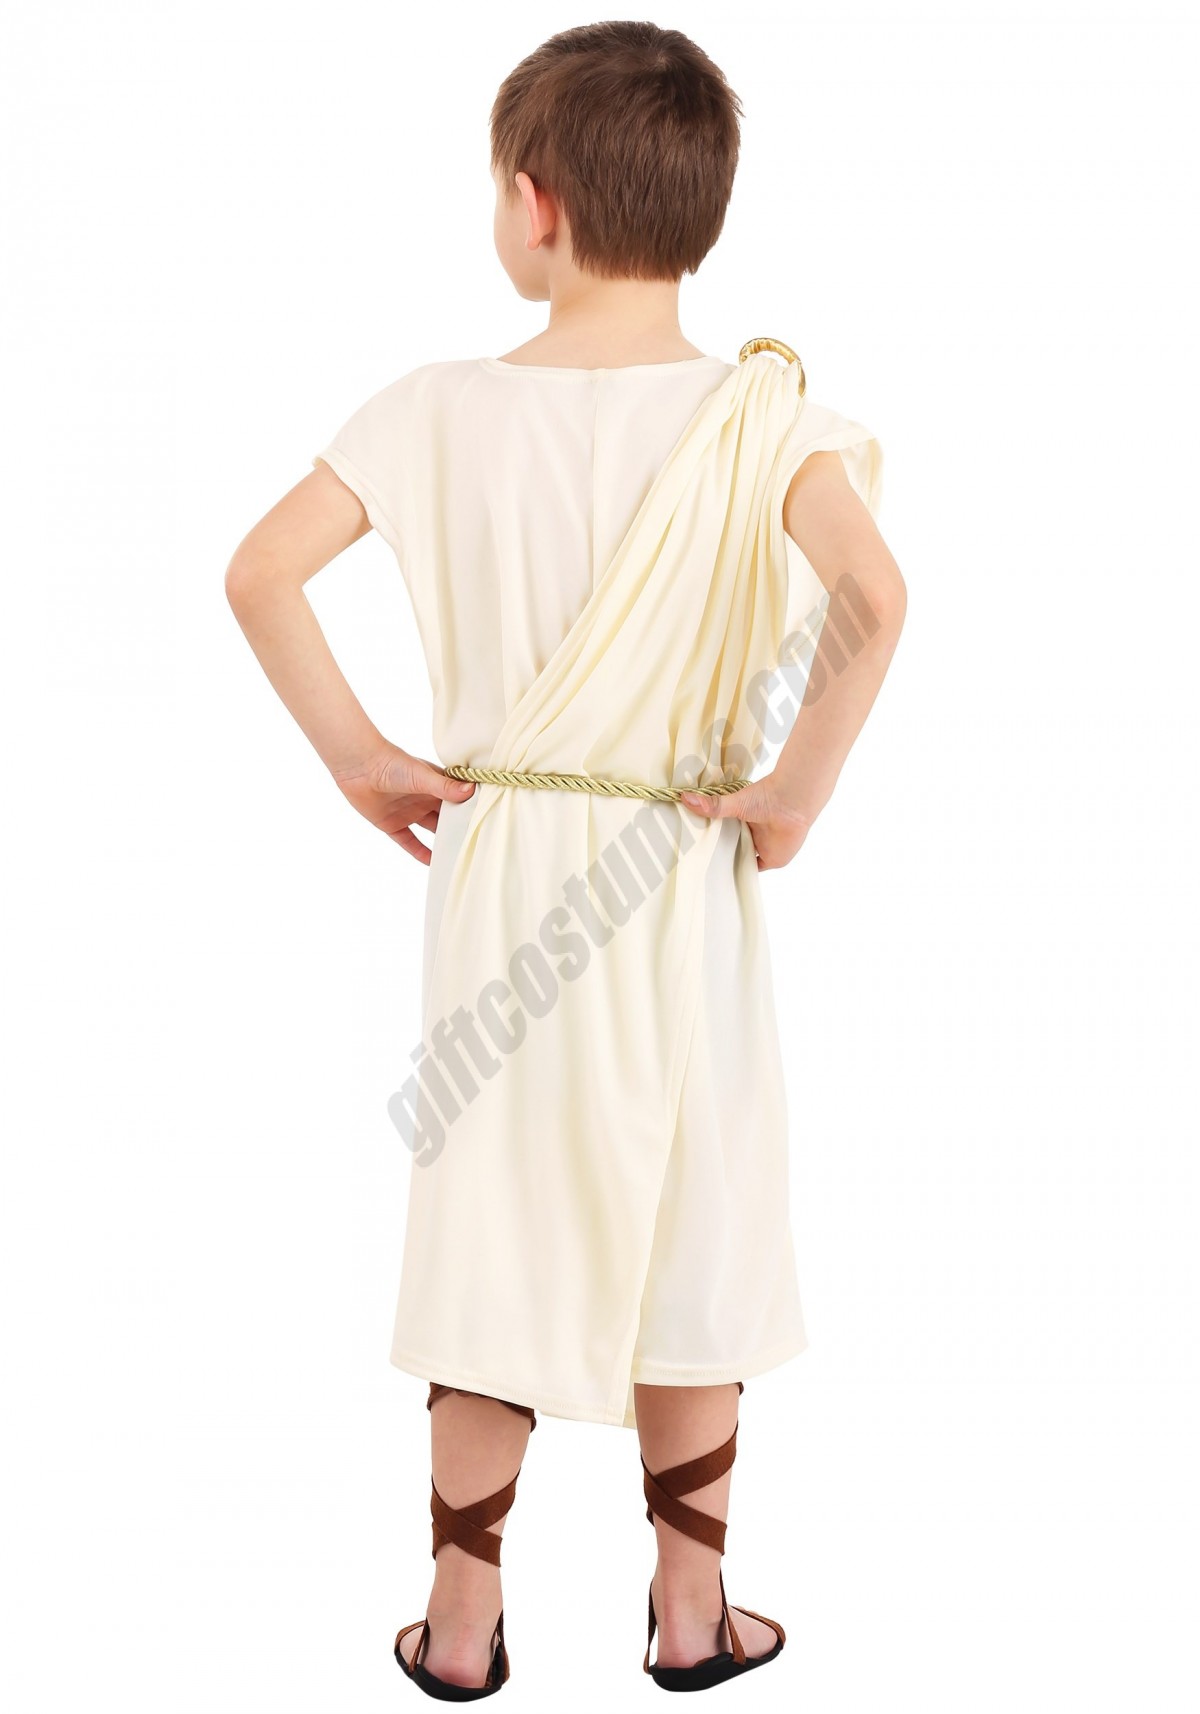 Toddler's Roman Toga Costume Promotions - -1